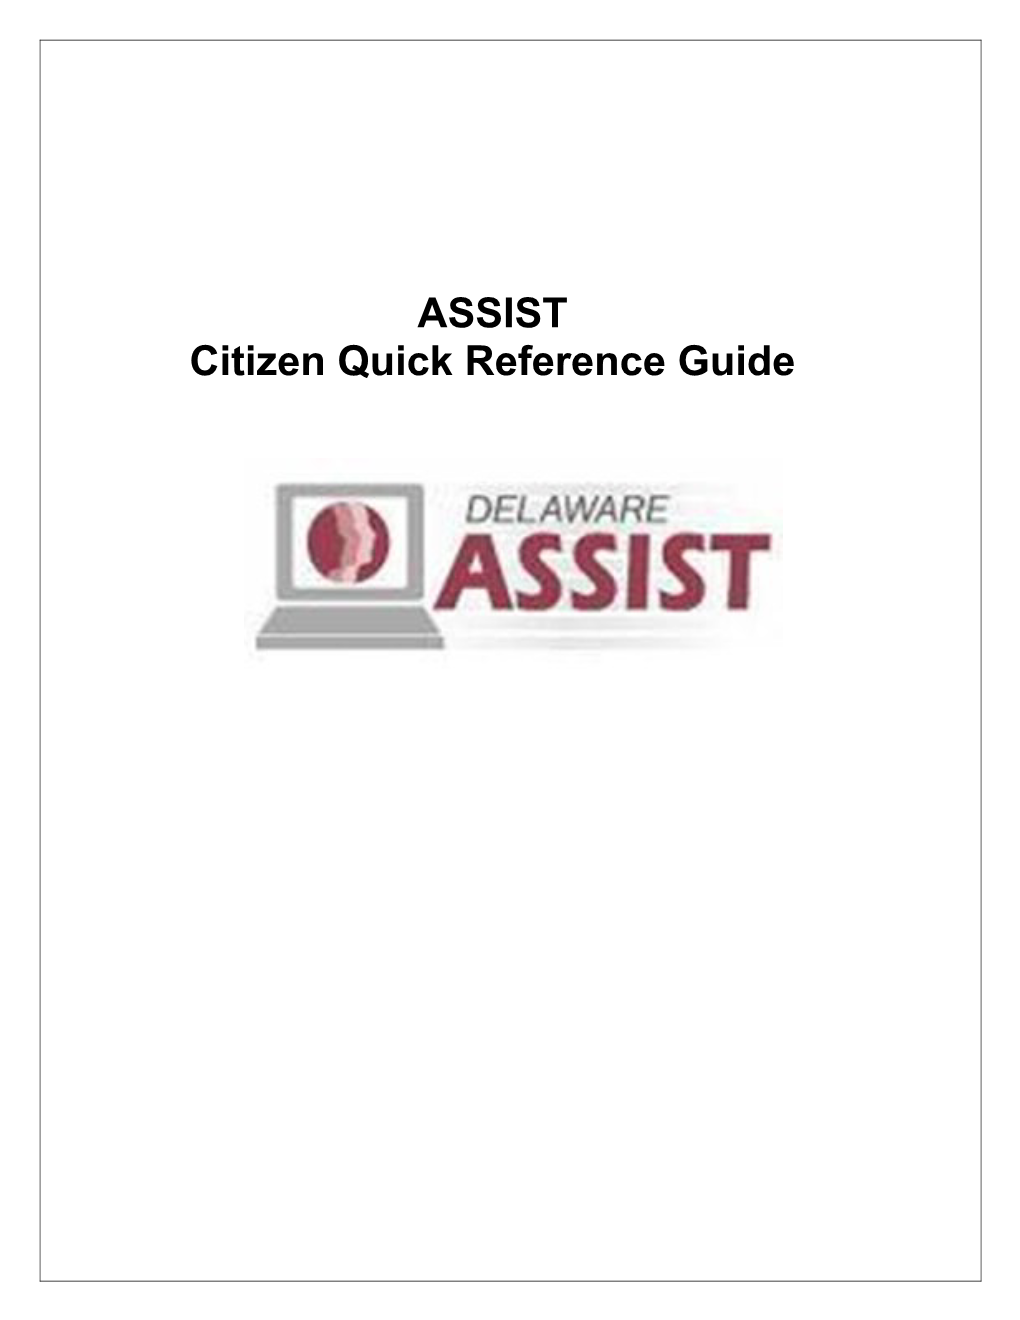 ASSIST Citizen Quick Reference Guide